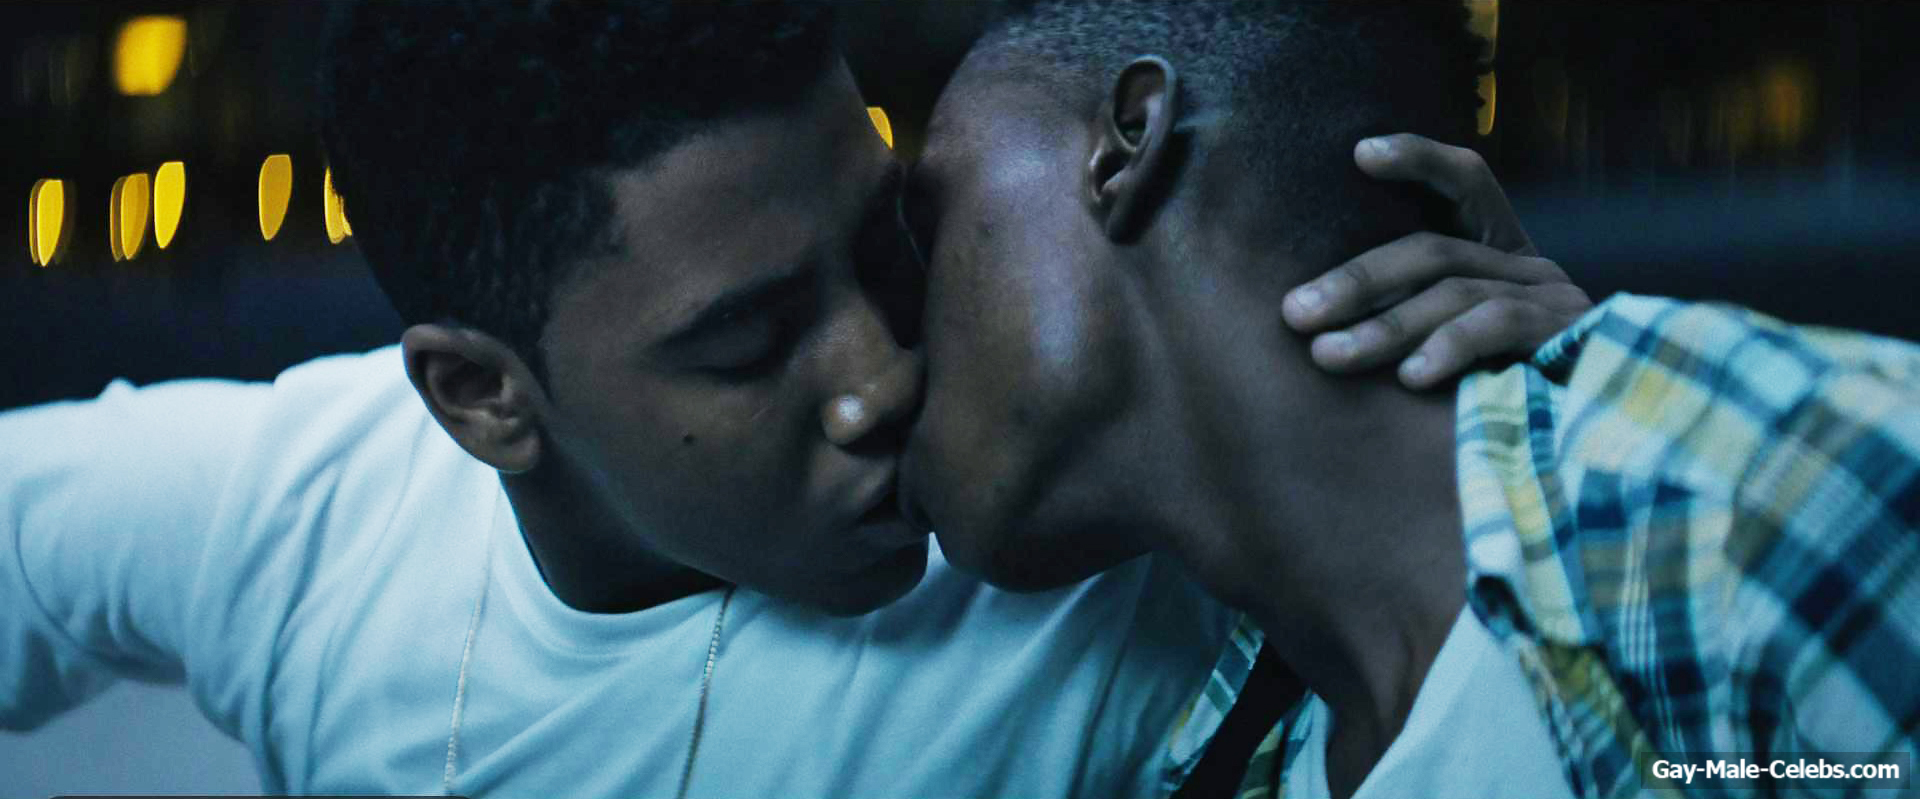 Jharrel Jerome Nude And Gay Scenes Collection pic